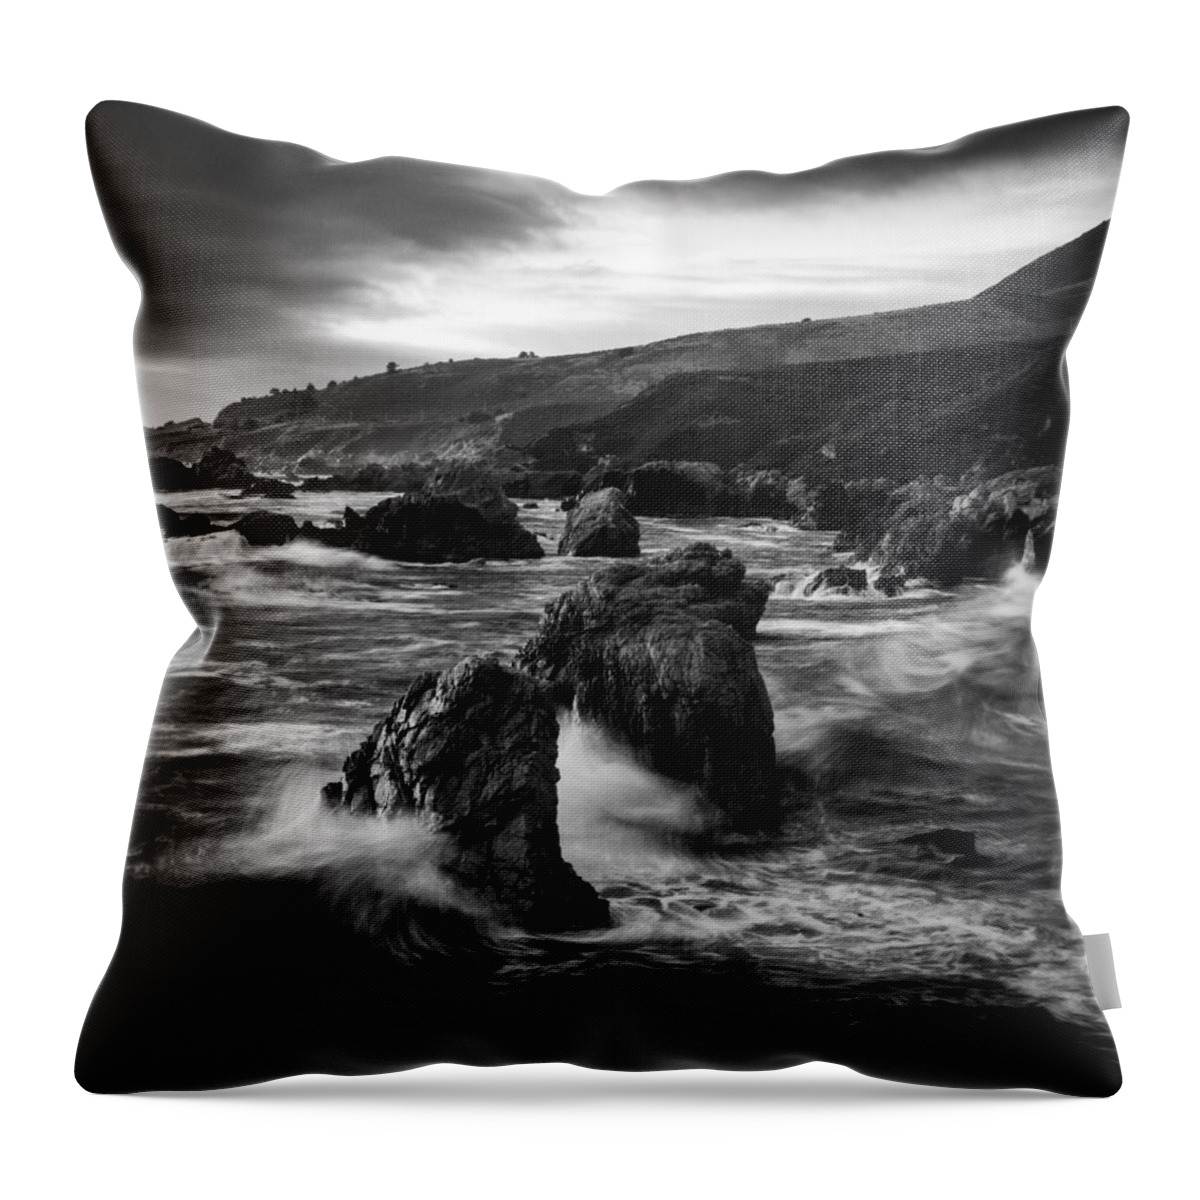 Soberanes Throw Pillow featuring the photograph Stone Cold Soberanes by Dayne Reast